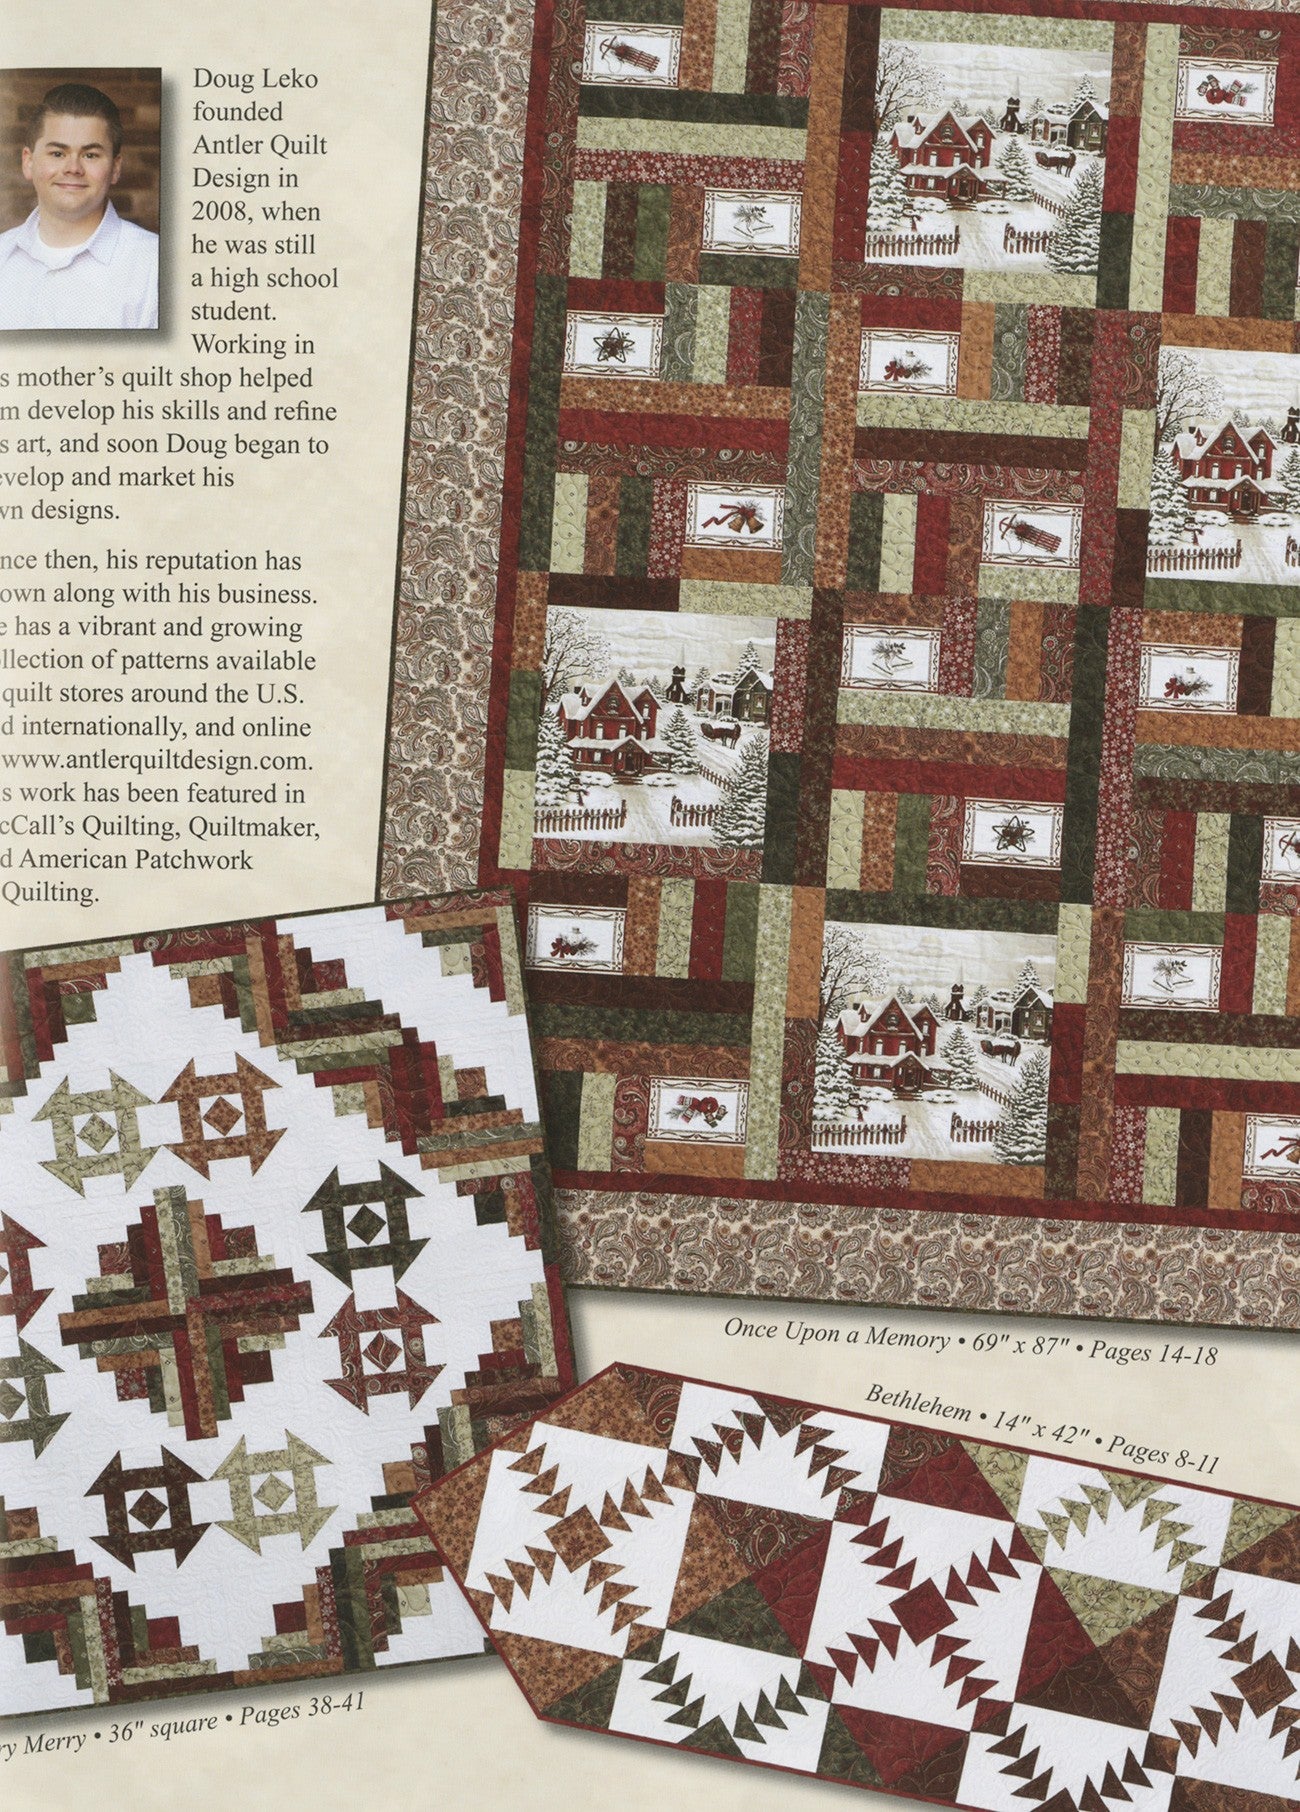 Once Upon a Memory Quilt Pattern Book by Doug Leko of Antler Quilt Designs